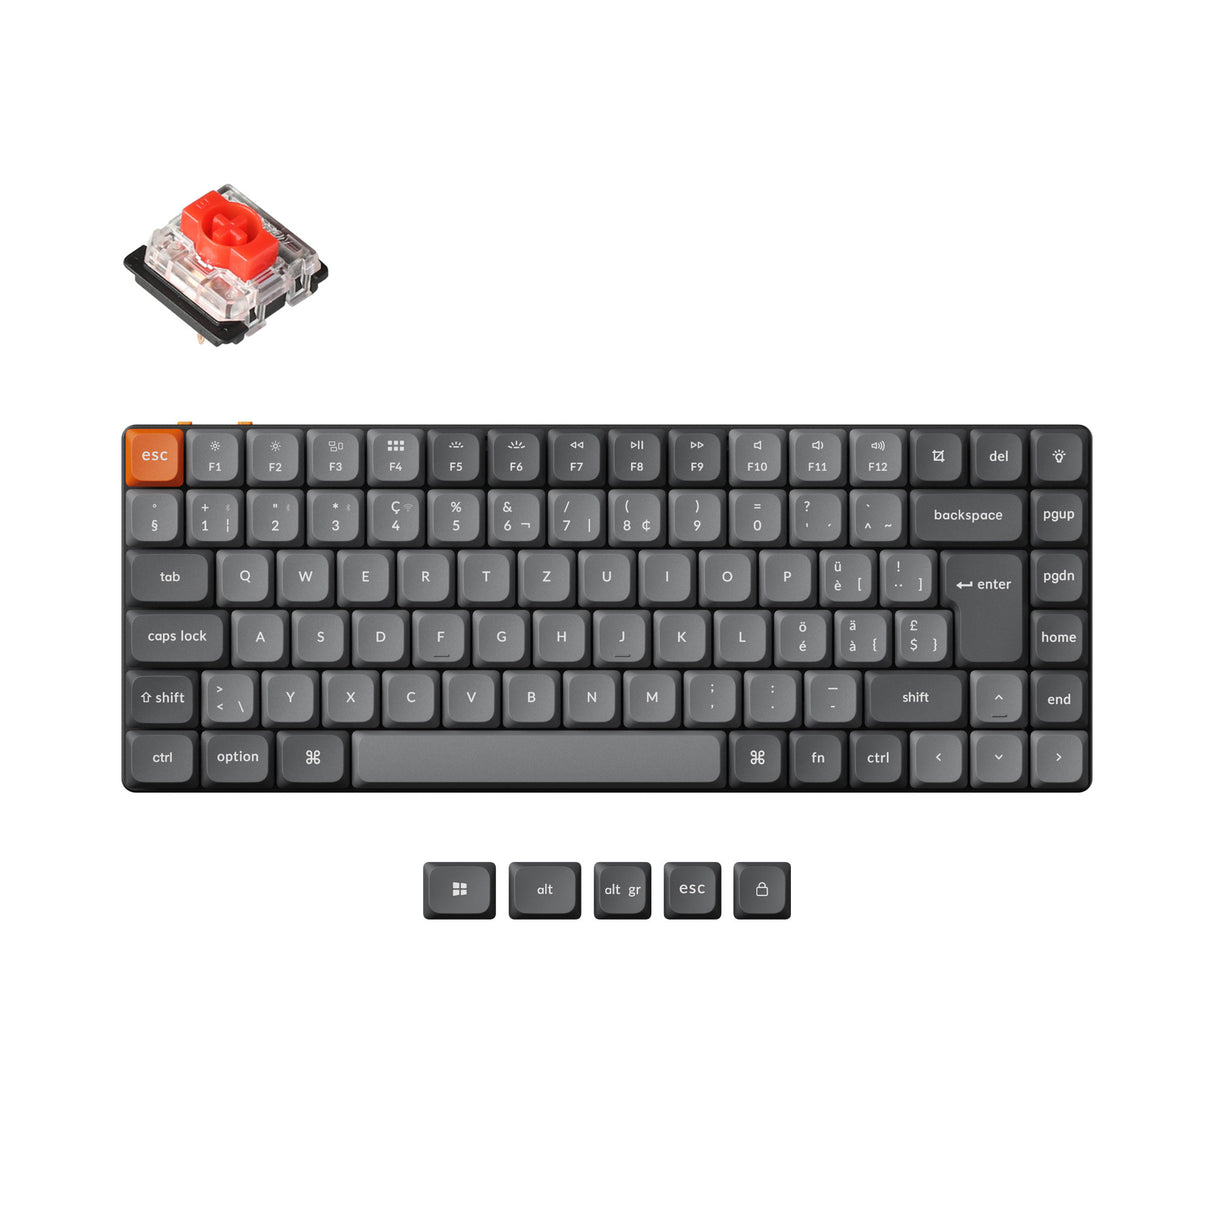 Keychron K3 Max QMK VIA ultra slim custom mechanical keyboard 75 percent layout PBT Keycaps hot-swappable Gateron low profile switch red ISO Swiss layout